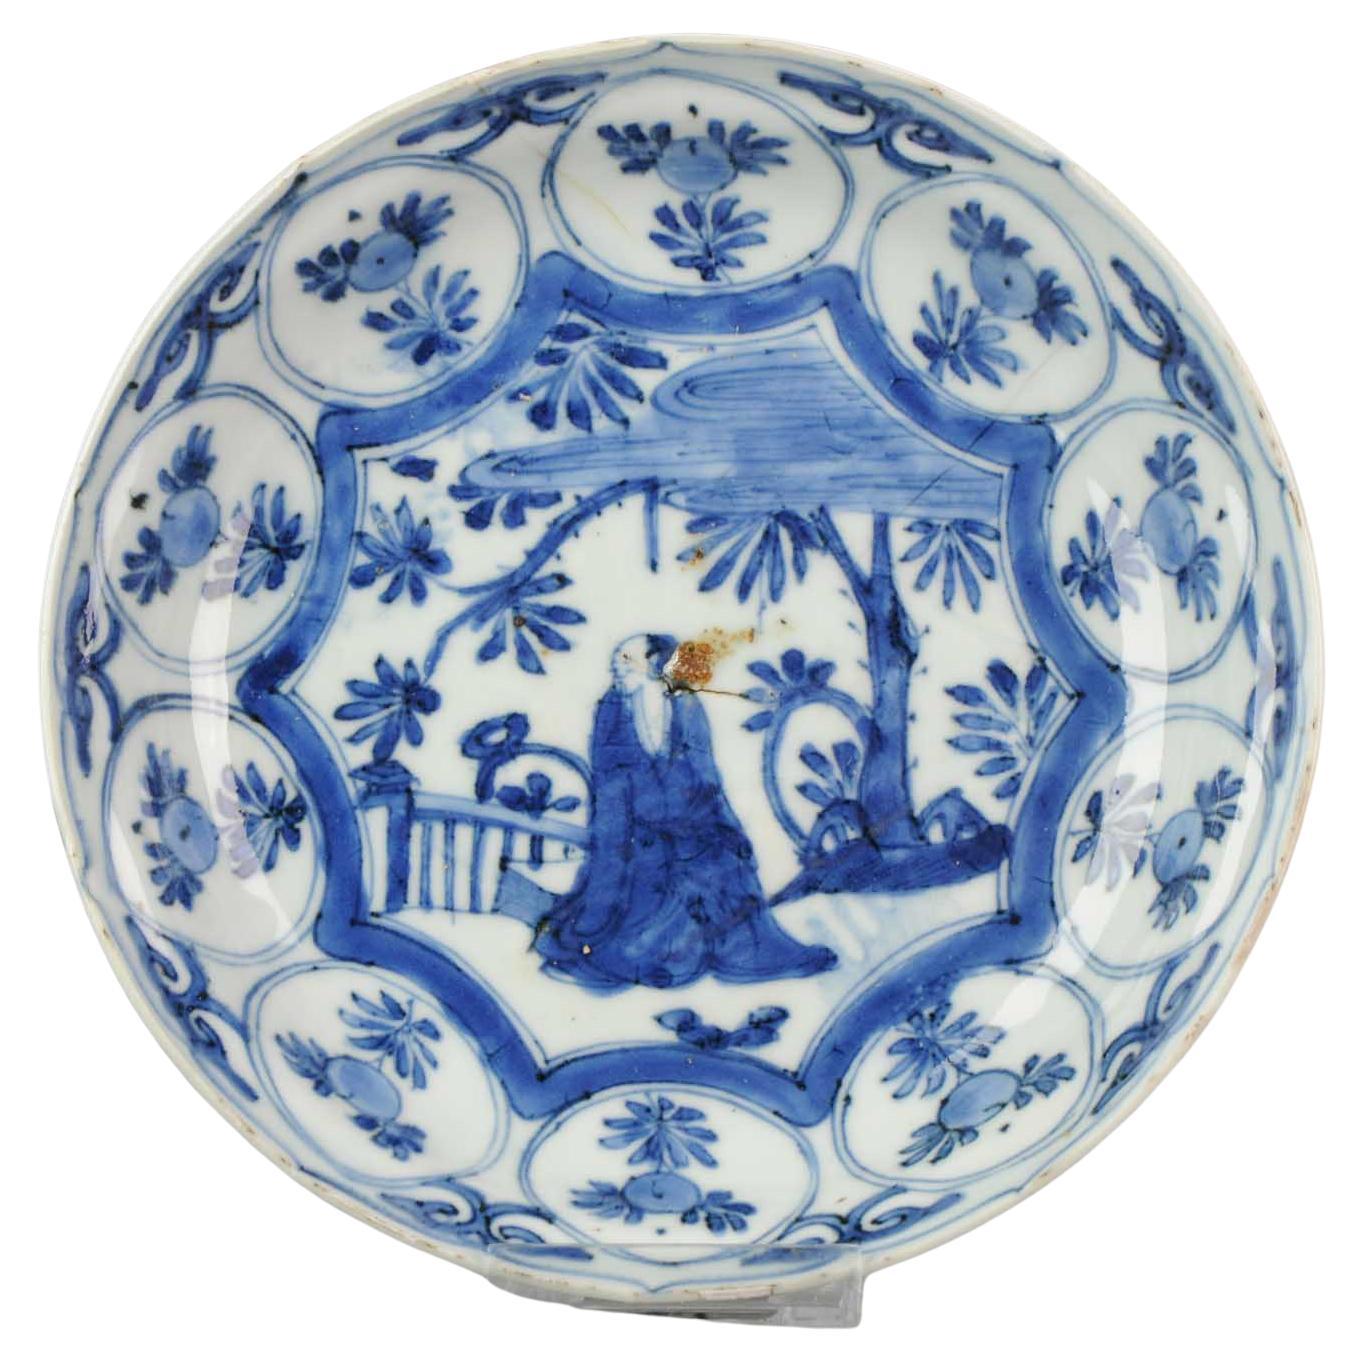 How do I know if my porcelain is antique?